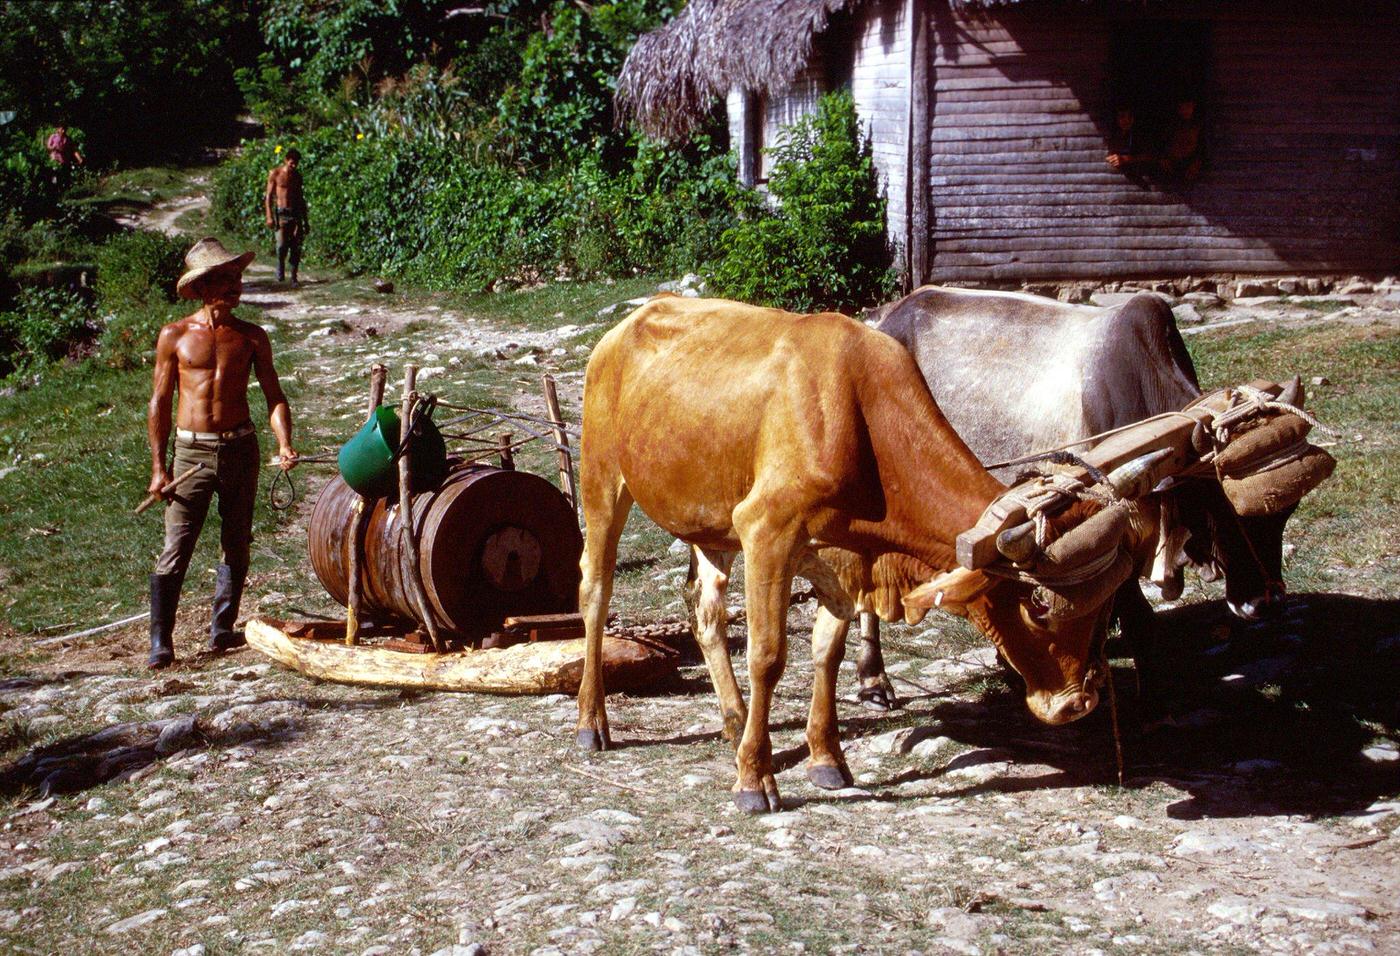 Cuban peasant carrying a water tank using two oxen in the Sierra Maestra mountain range, Cuba, 1990s.